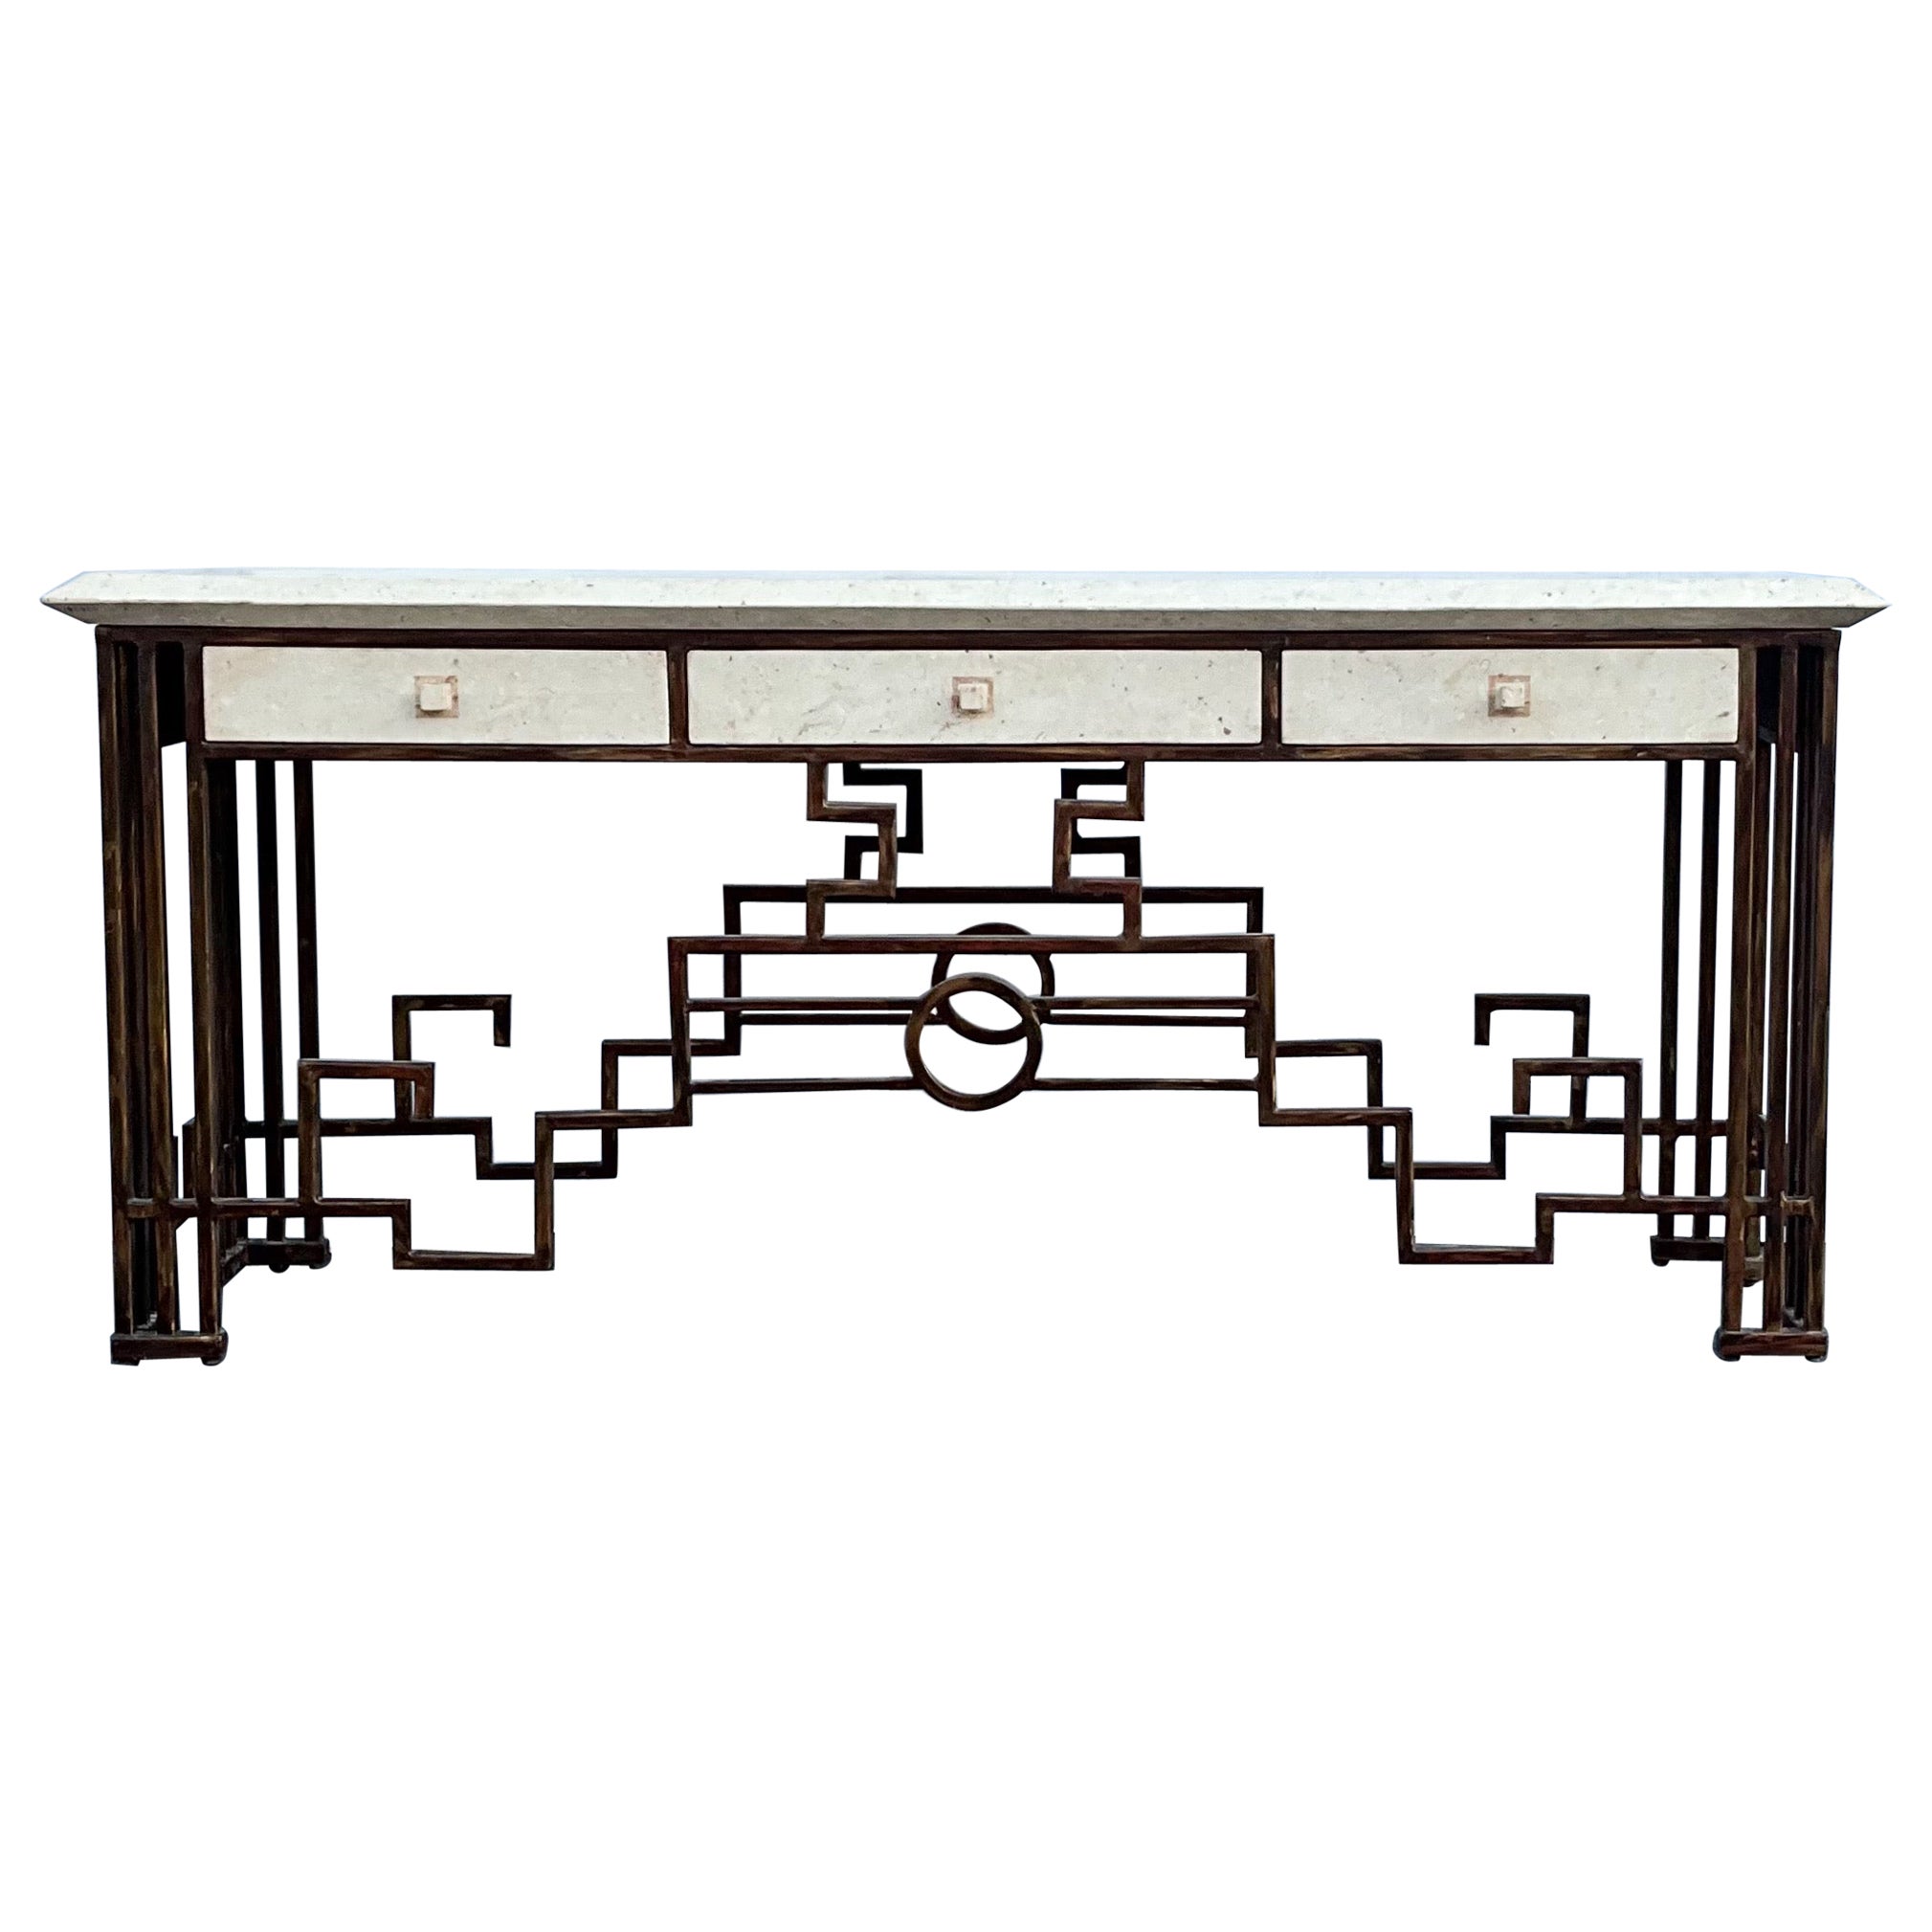 Italian Organic Modern / Arts & Crafts Style Travertine and Iron Console Table For Sale